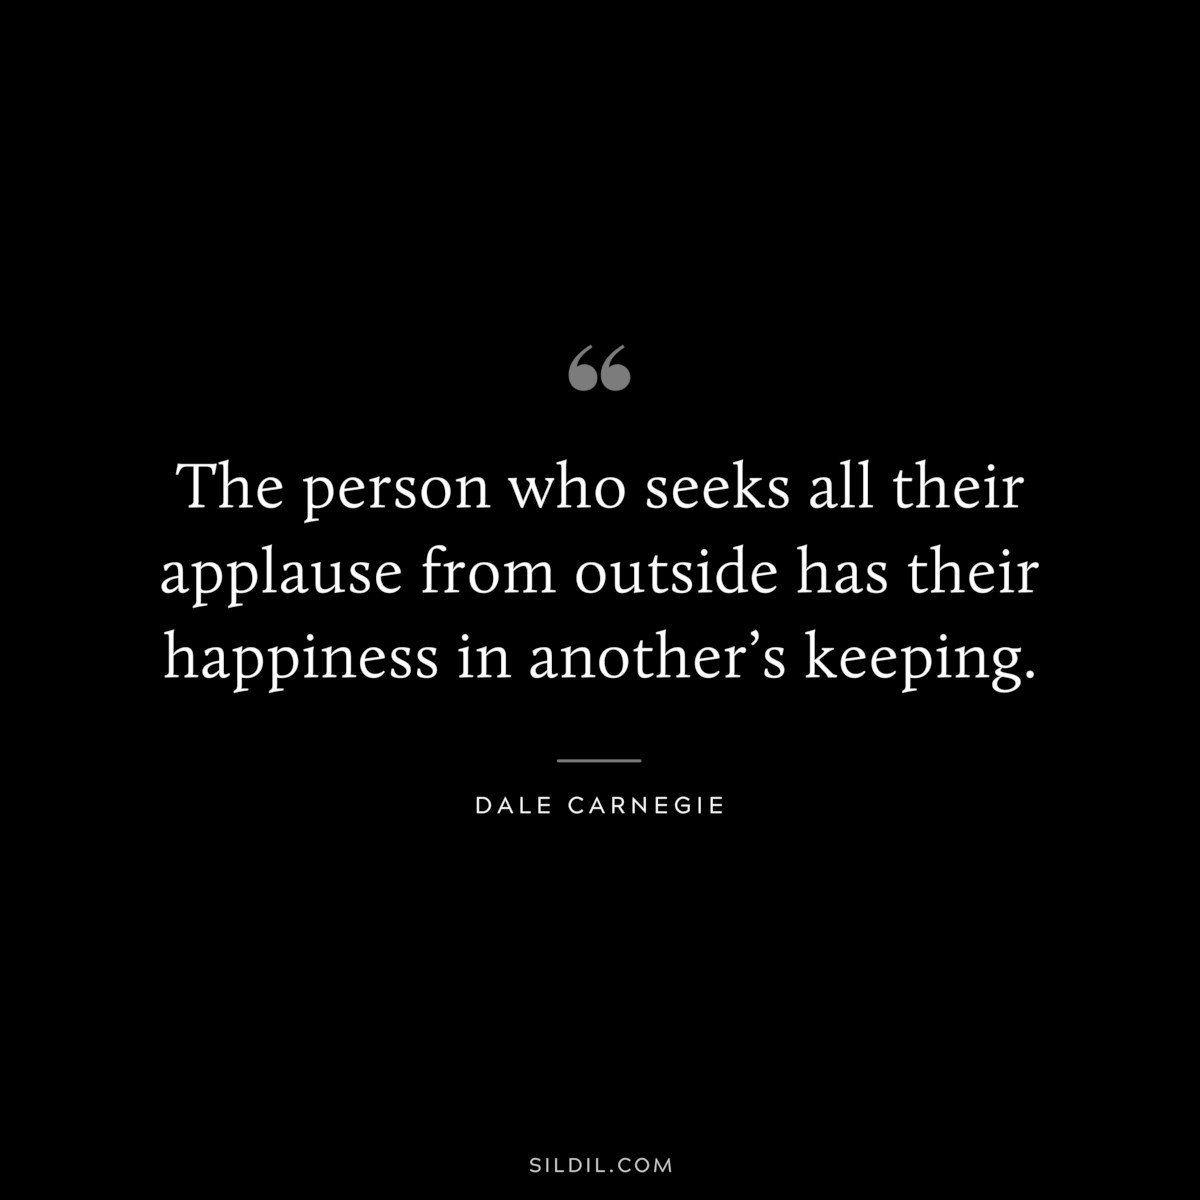 The person who seeks all their applause from outside has their happiness in another’s keeping.― Dale Carnegie